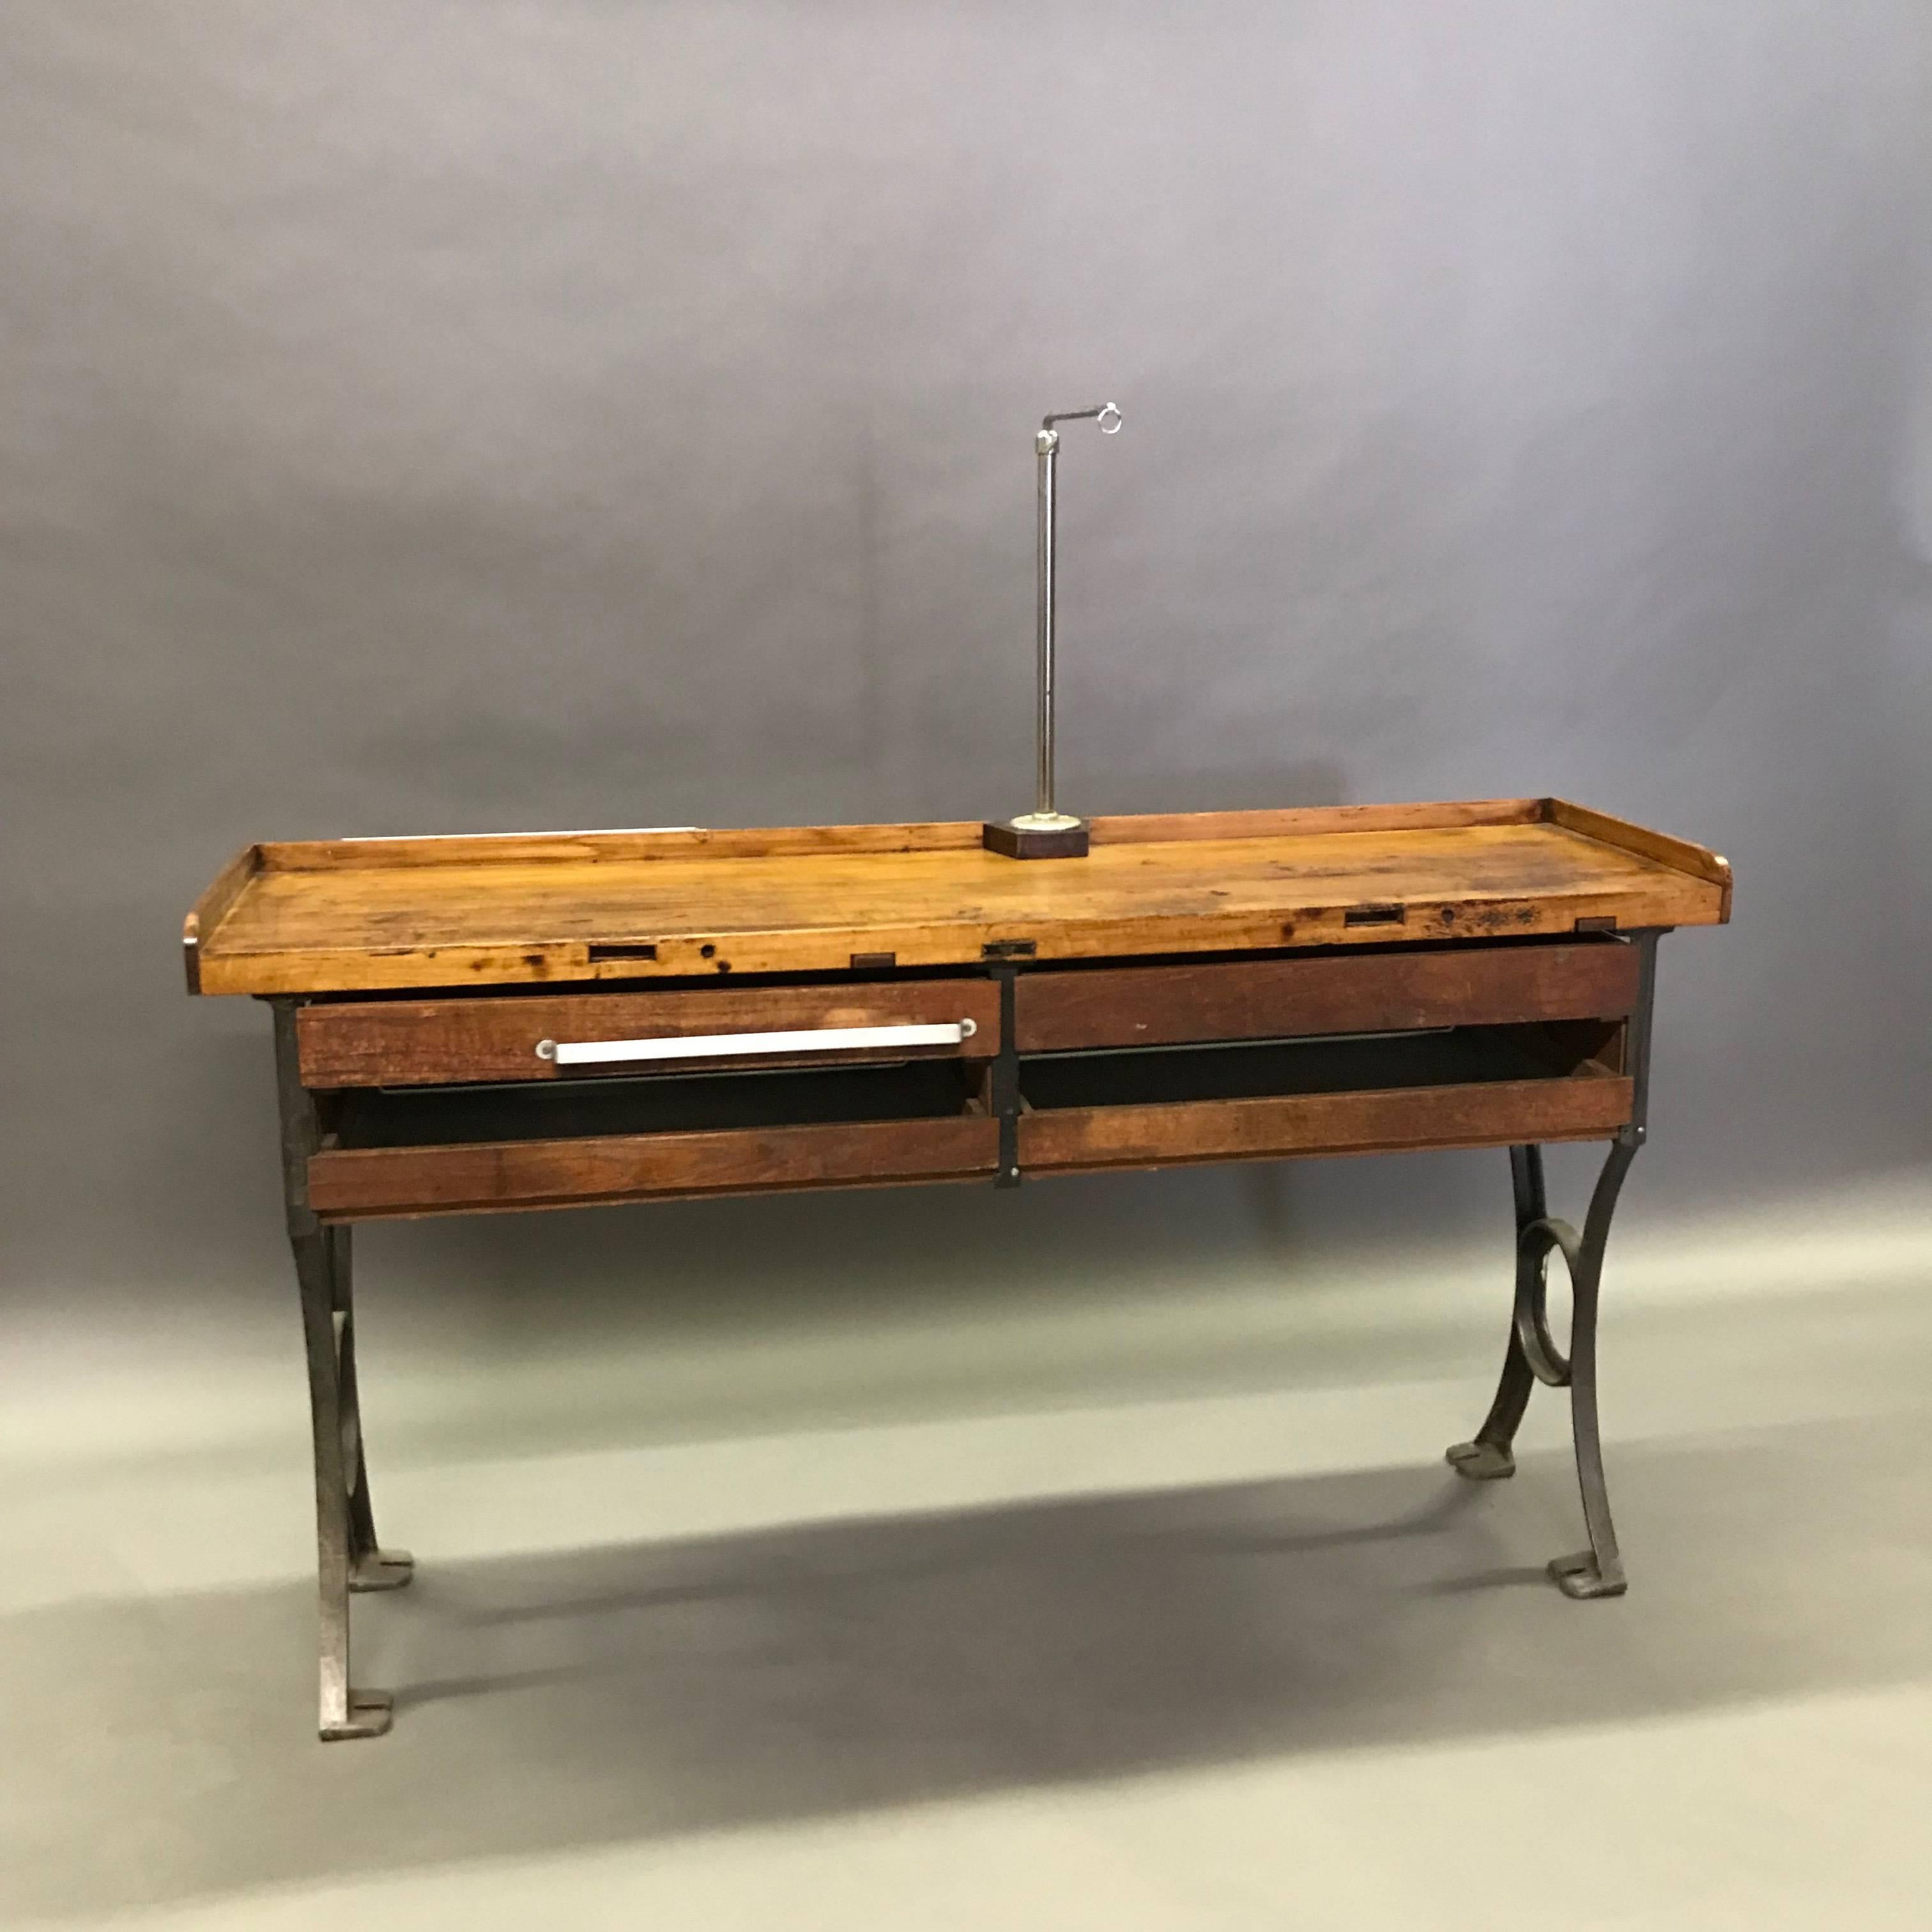 Industrial, 1930s, jeweler's work bench table features a rustic, work worn maple top with four pull-out drawers, cast iron frame and aluminum handle. The chrome machine mount on top is removable. The work surface height is 34.25 in, the seating